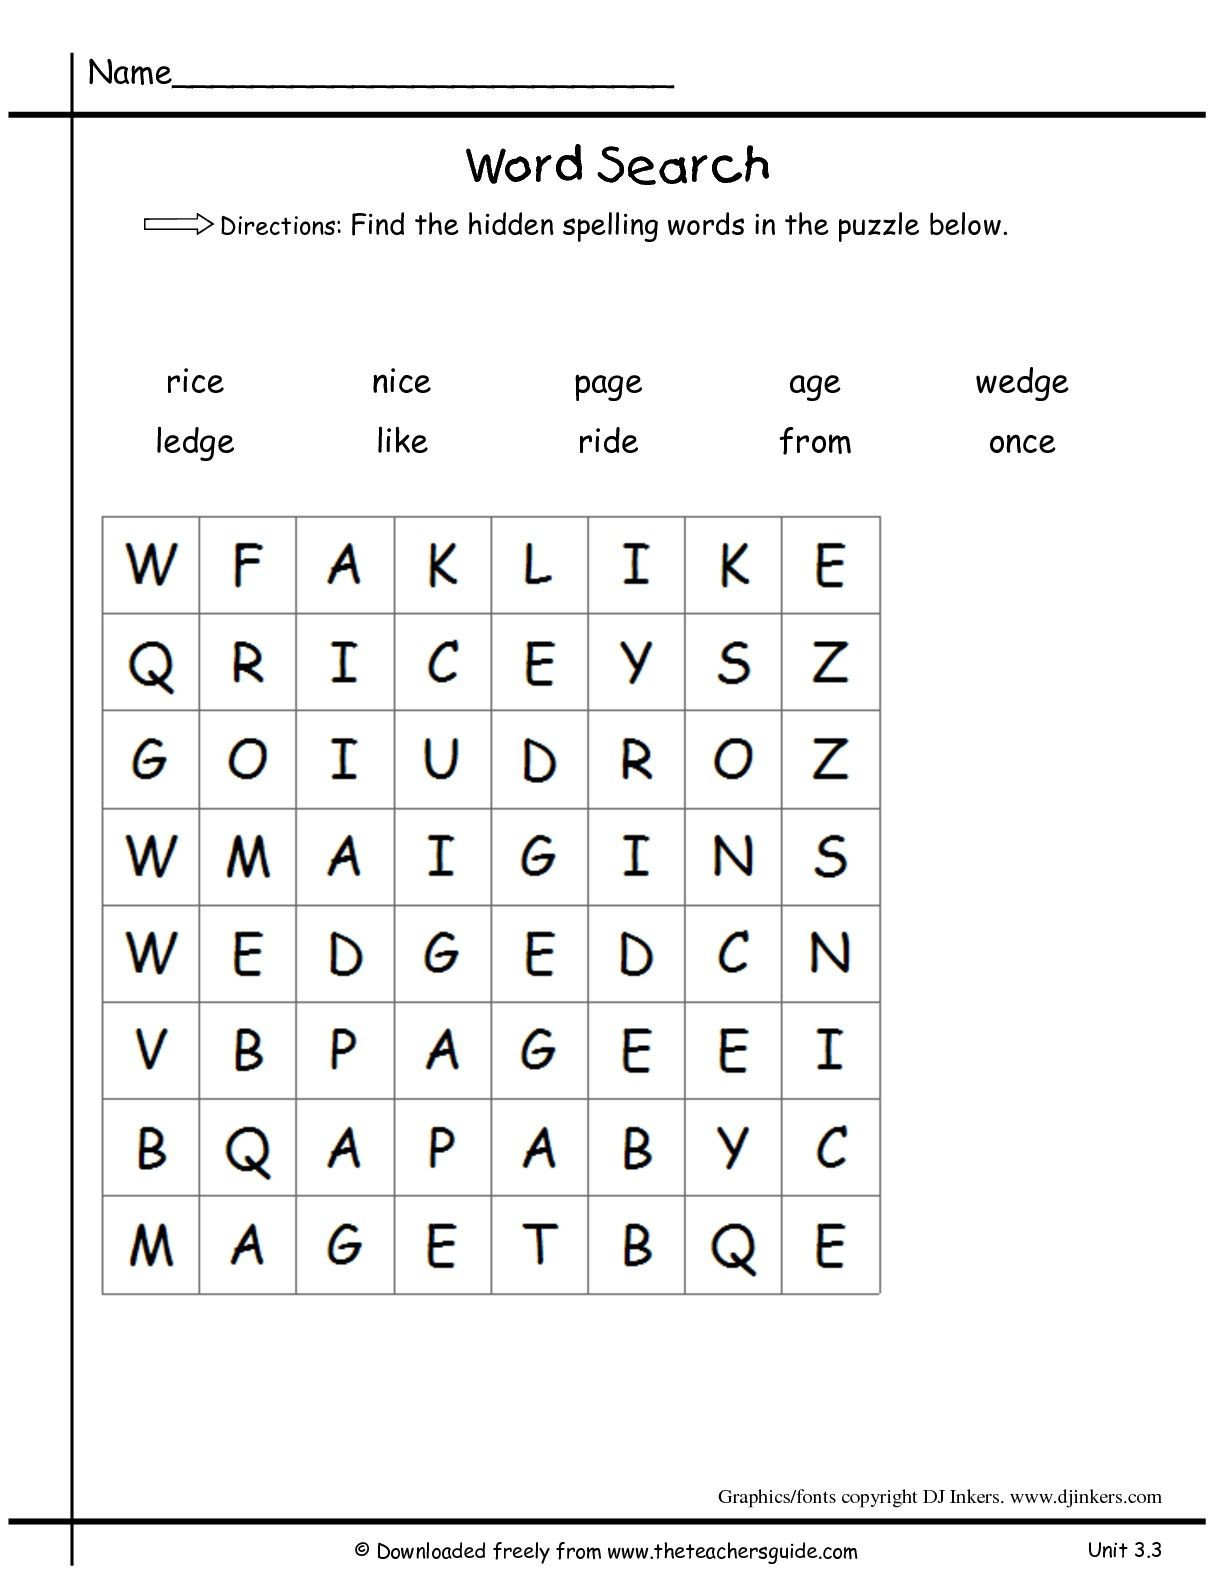 Vocabulary Worksheets for 1st Graders Free 1st Grade Vocabulary Worksheets